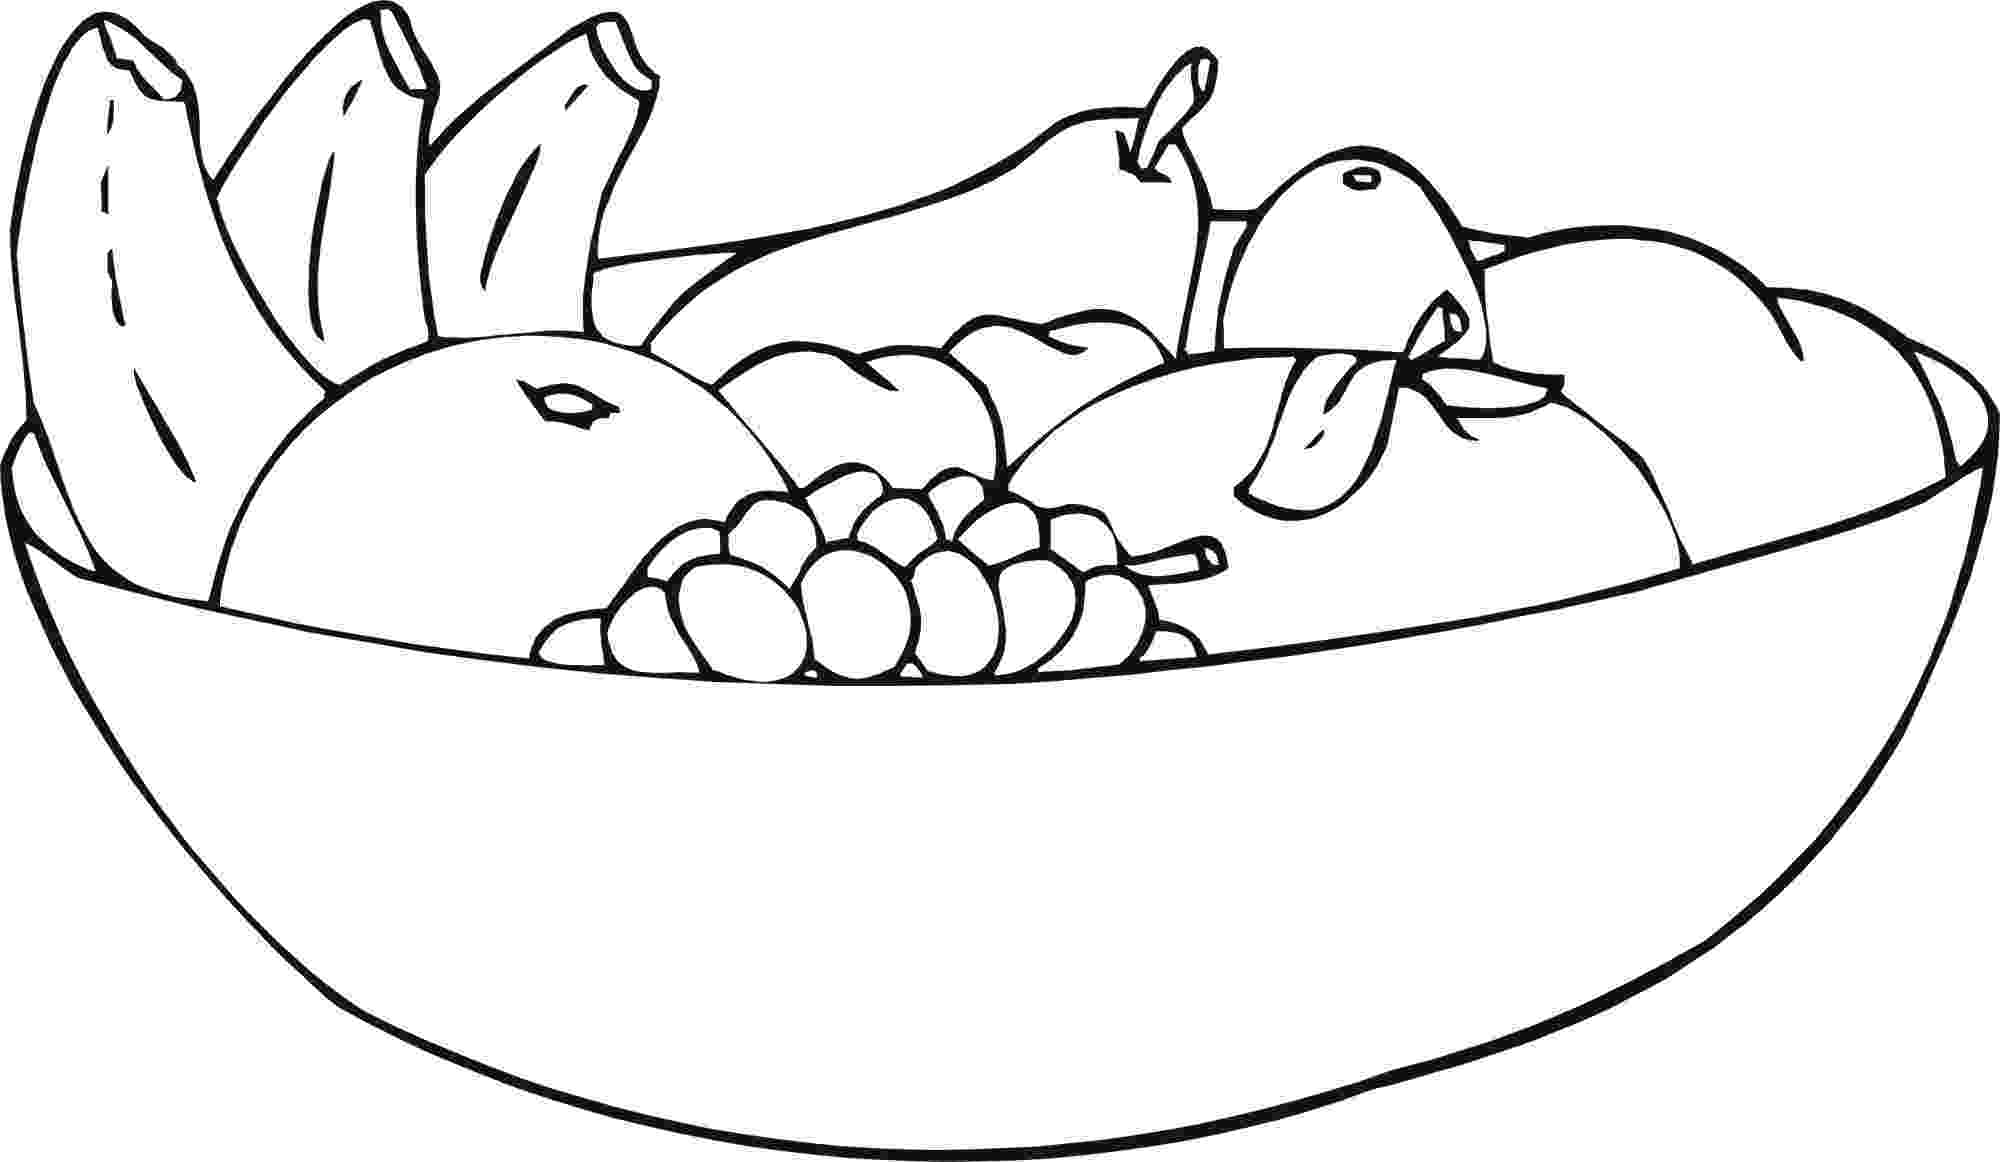 fruit images to color fruit coloring pages hellokidscom images to fruit color 